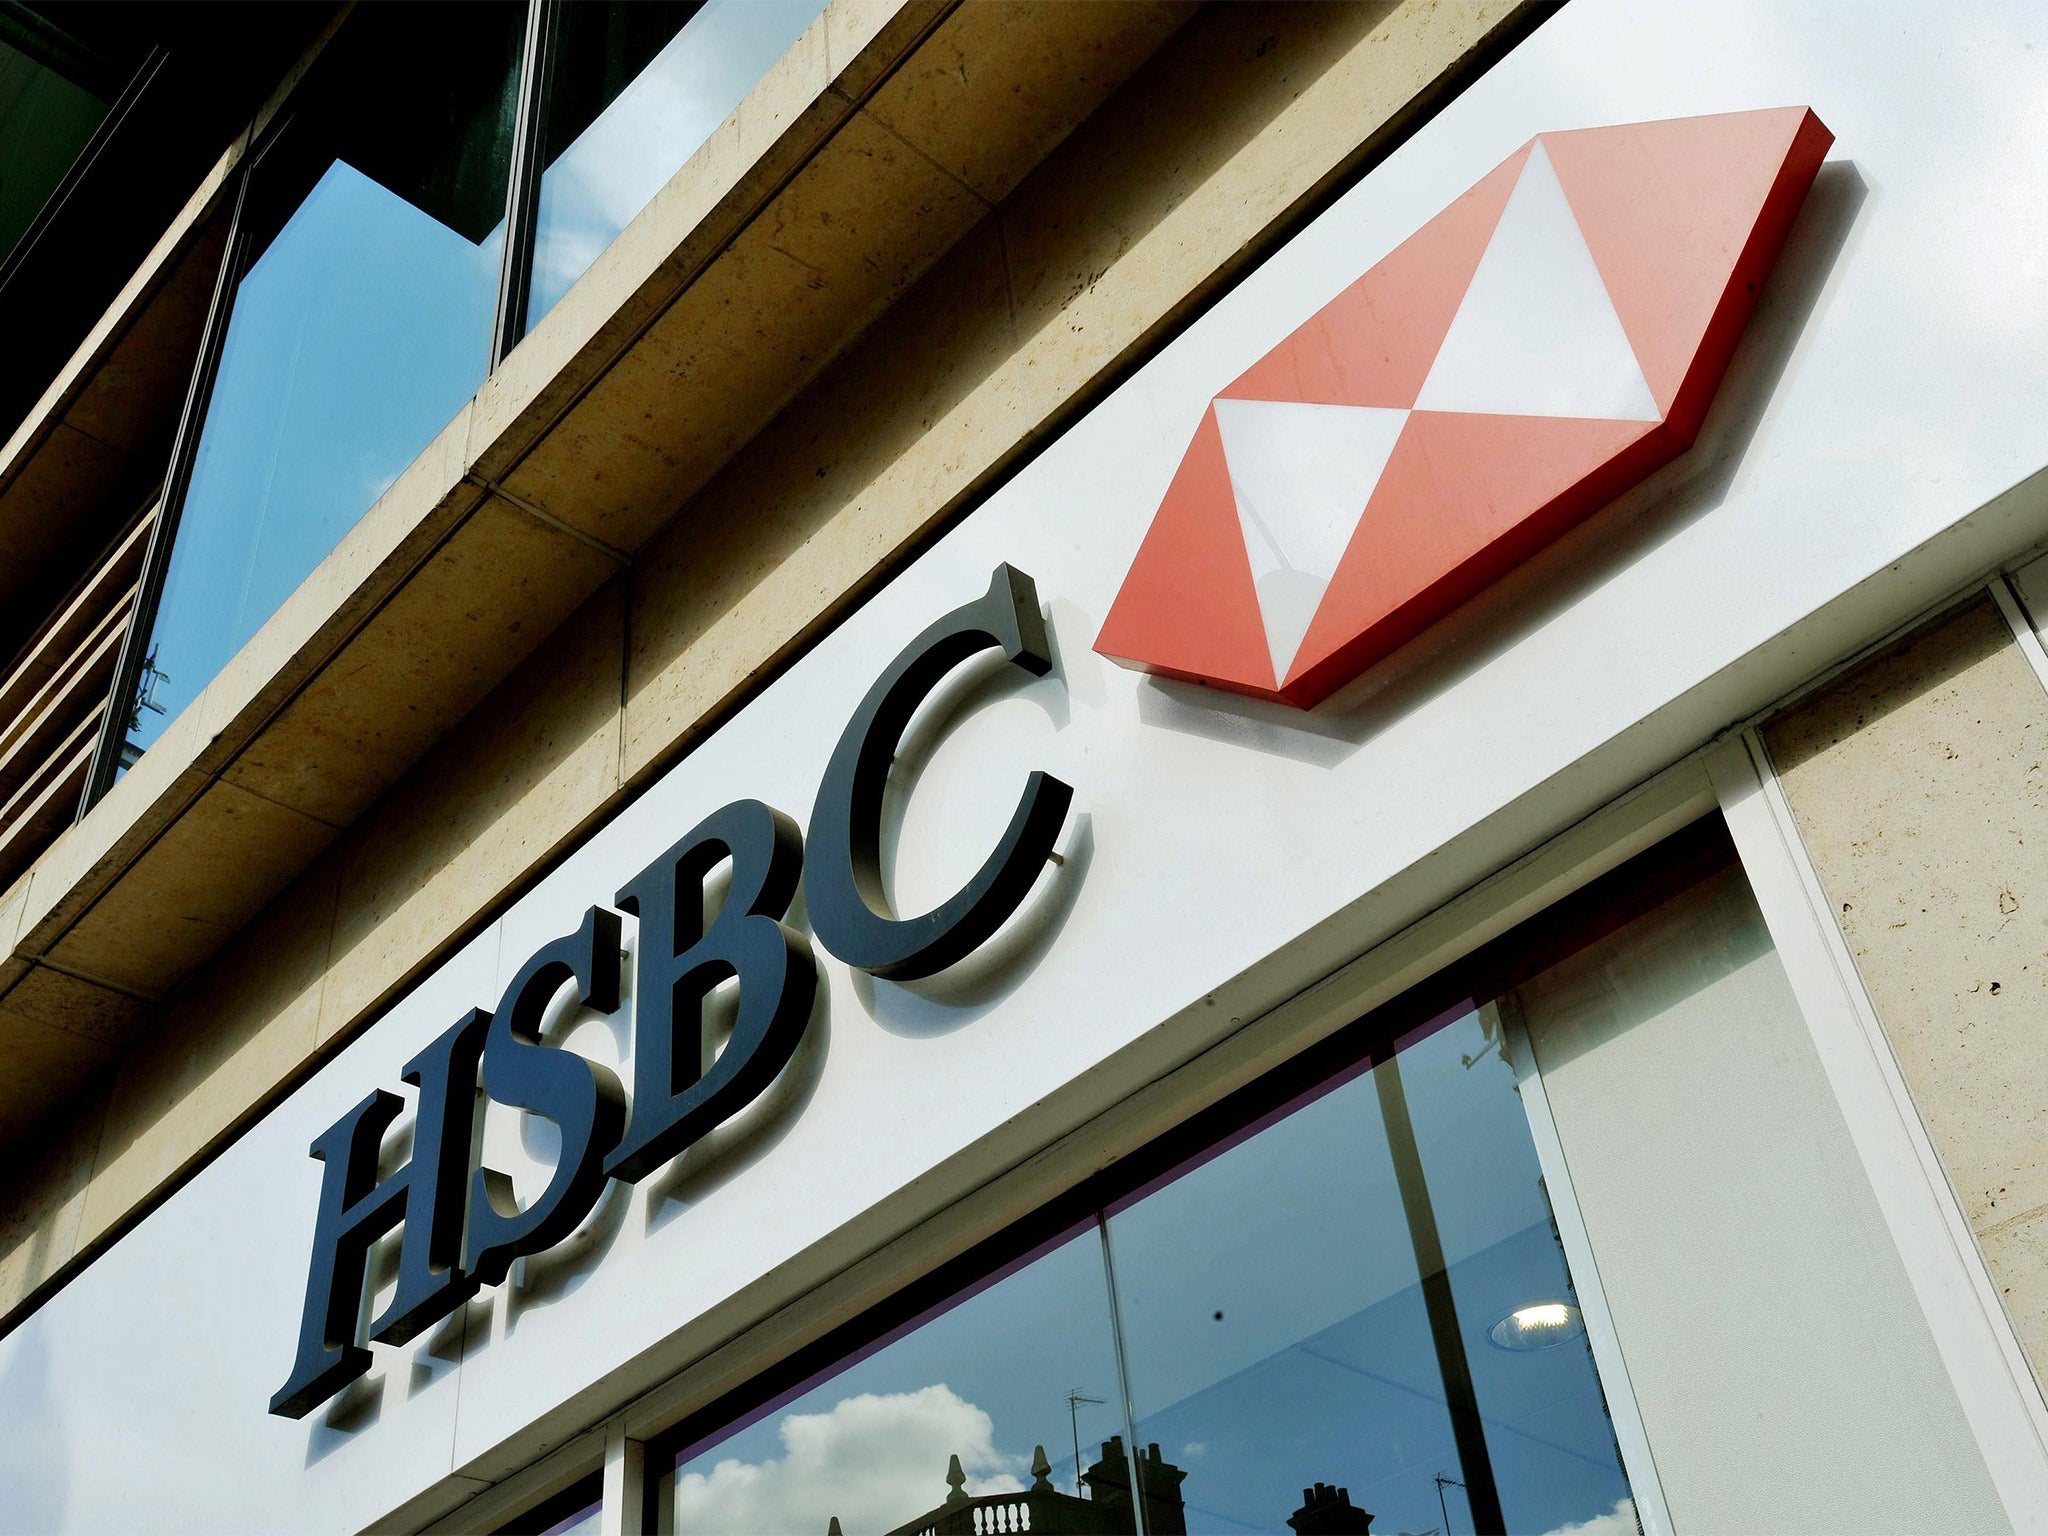 The Ummah Welfare Trust called on its supporters to boycott HSBC